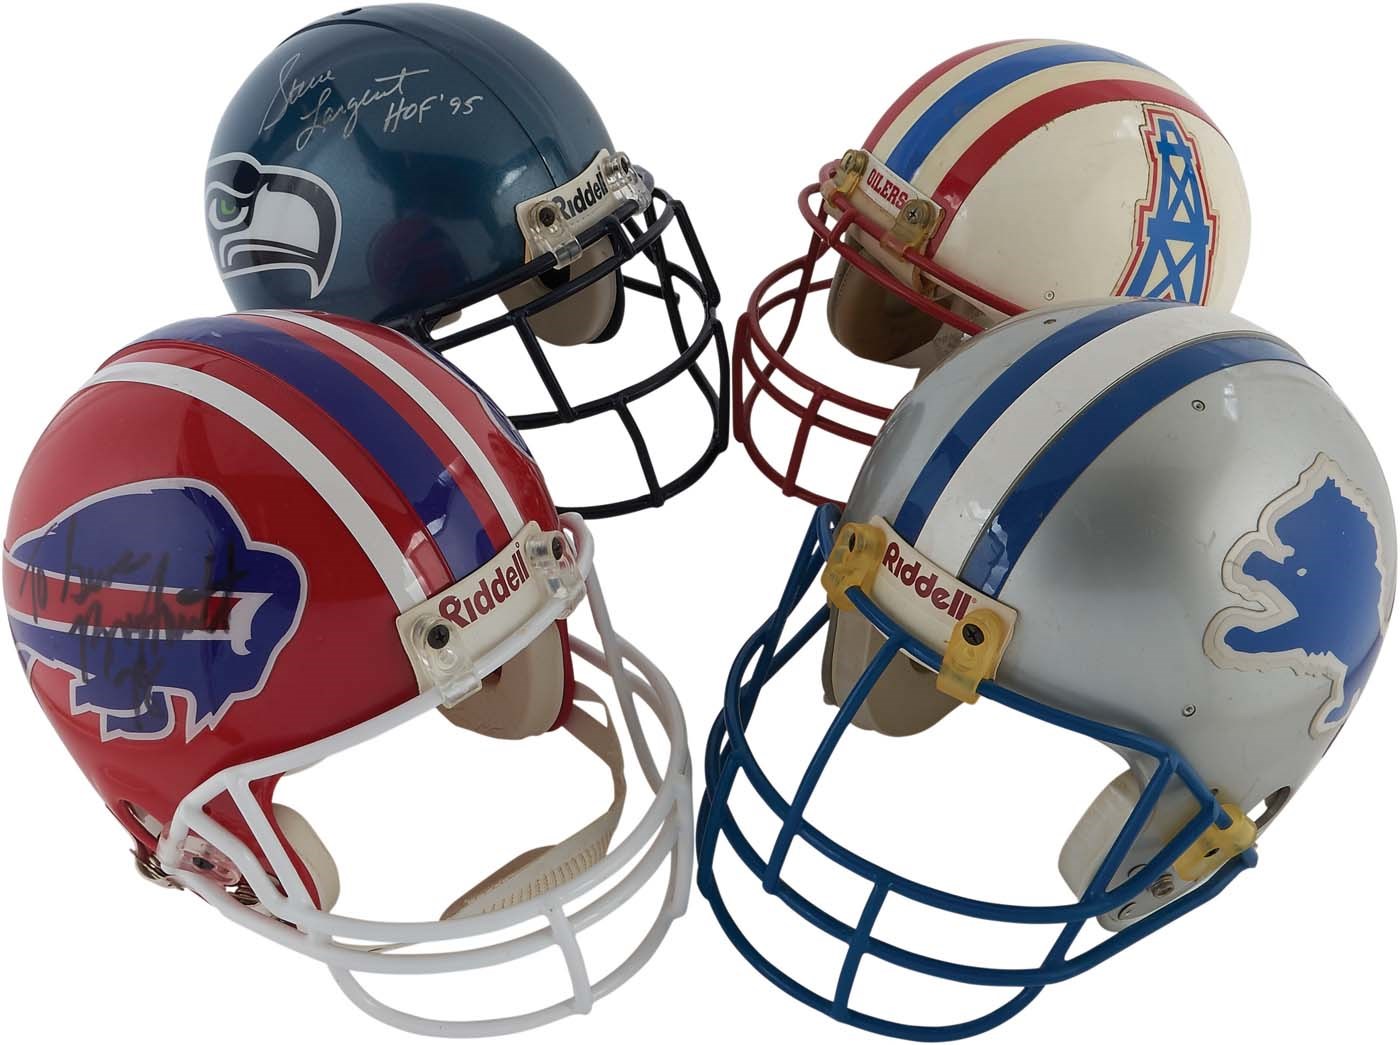 Professional Model Football Helmets with Steve Largent and Bruce Smith Signatures (4)